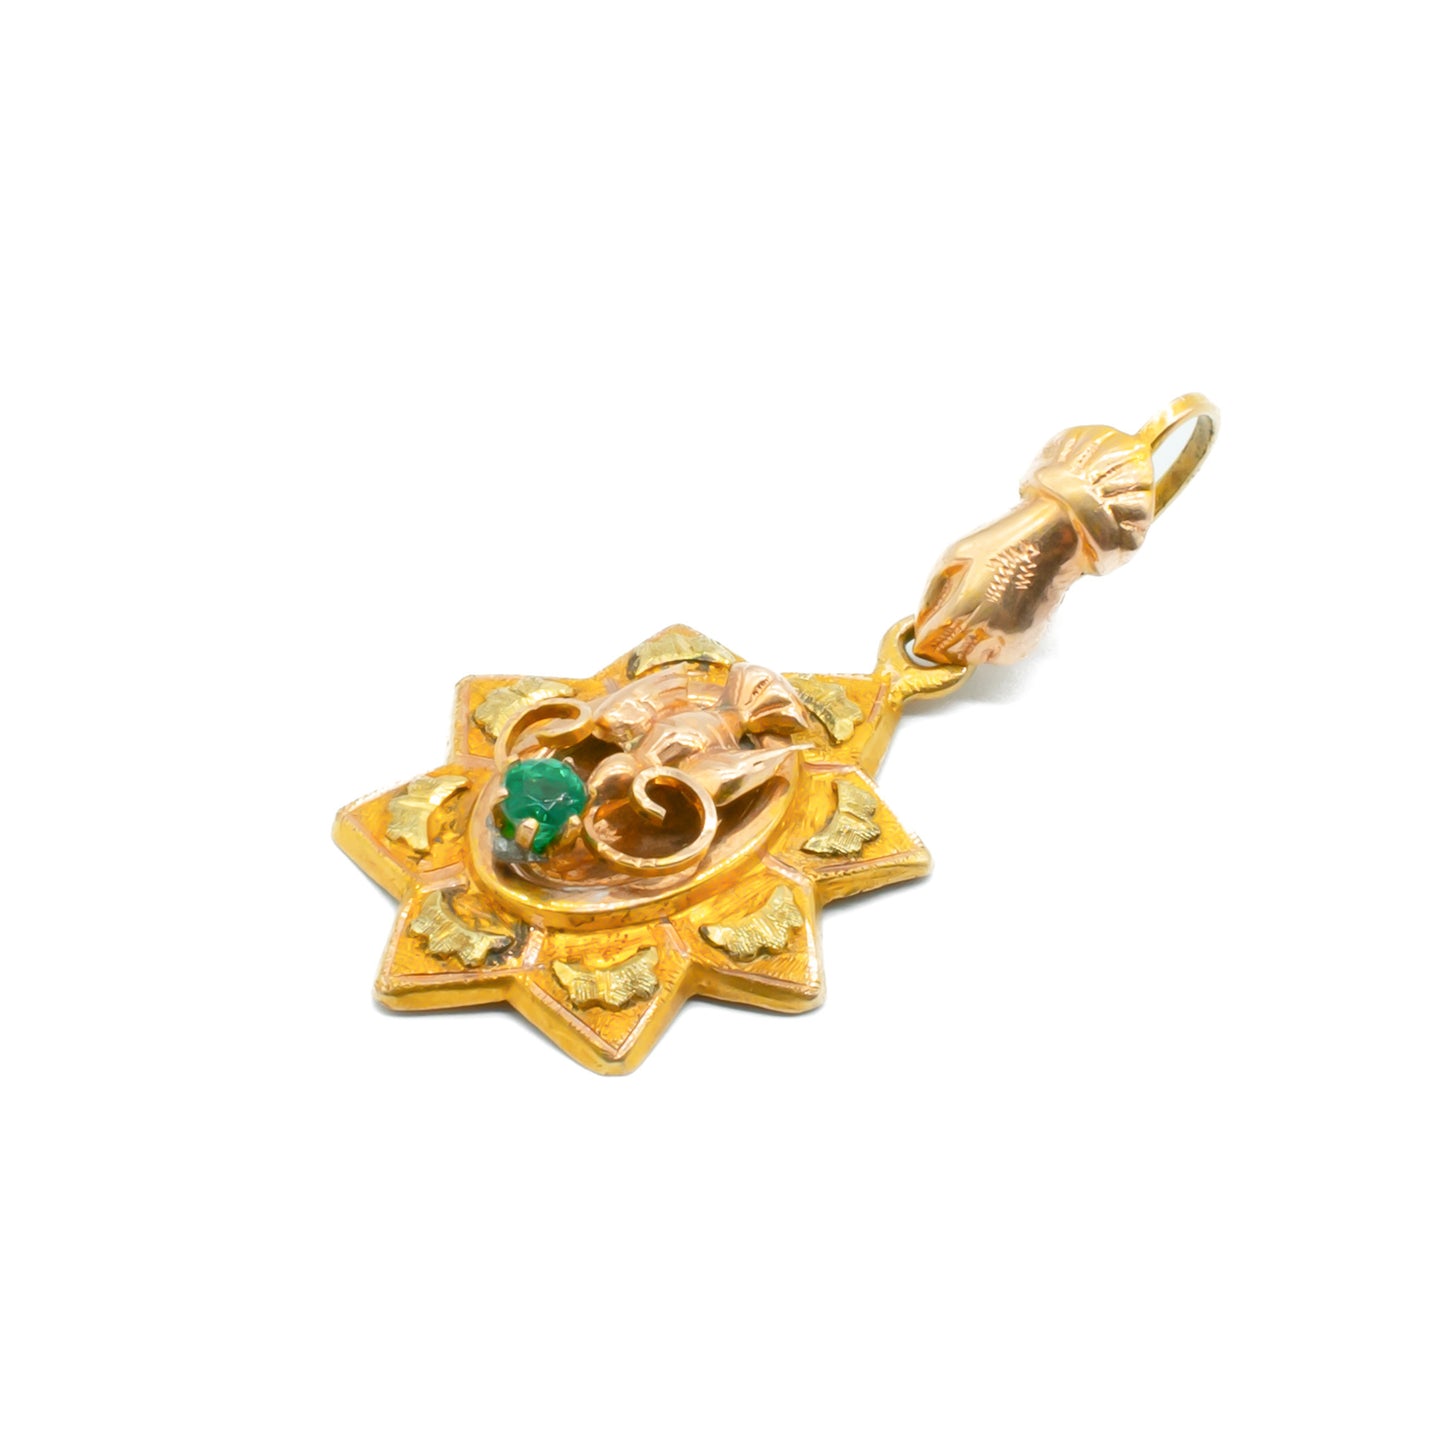 Exquisite Victorian 15ct rose and yellow gold pendant depicting a hand and dove, set with a faceted emerald.